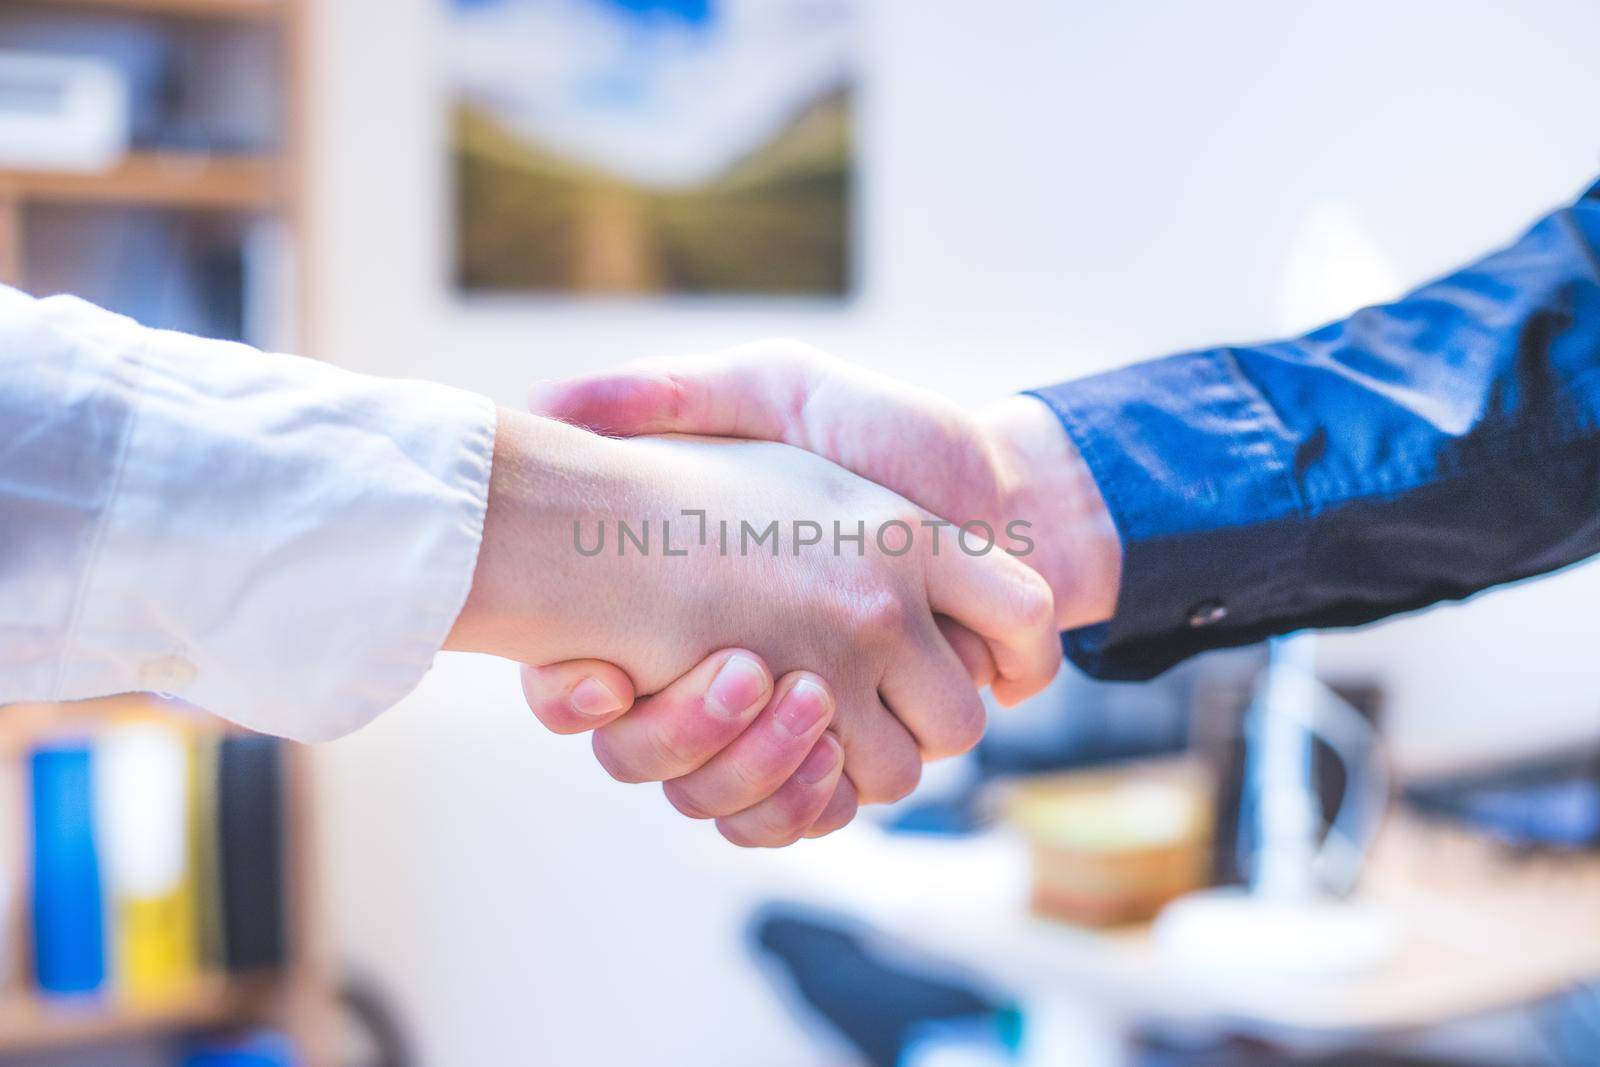 Shaking hands, concept for teamwork: Close up of man and woman shaking hands in the office by Daxenbichler